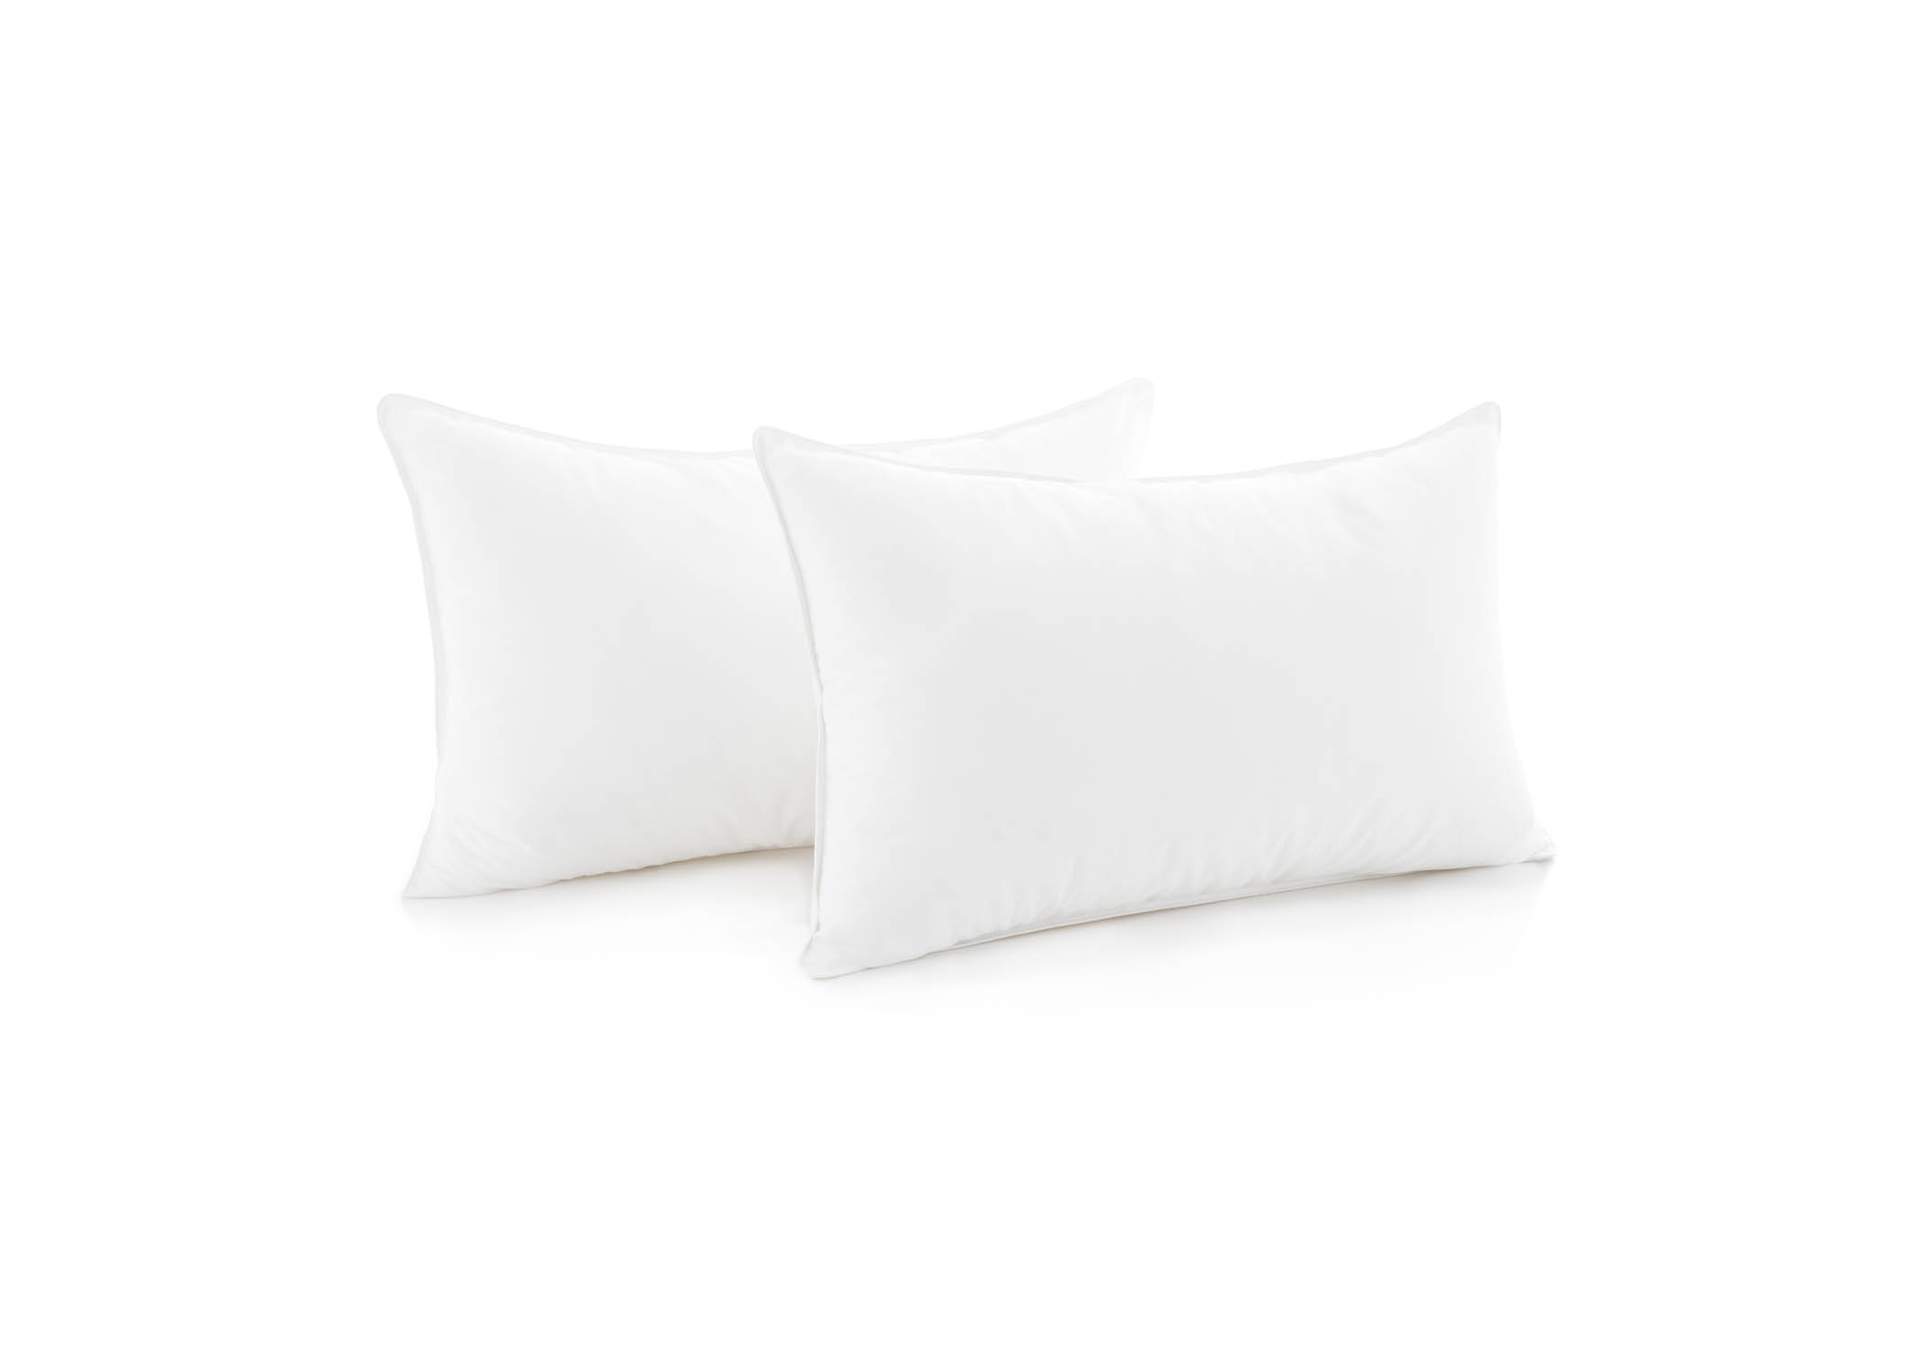 Malouf Compressed -2-Pack Pillow - King Size,Malouf